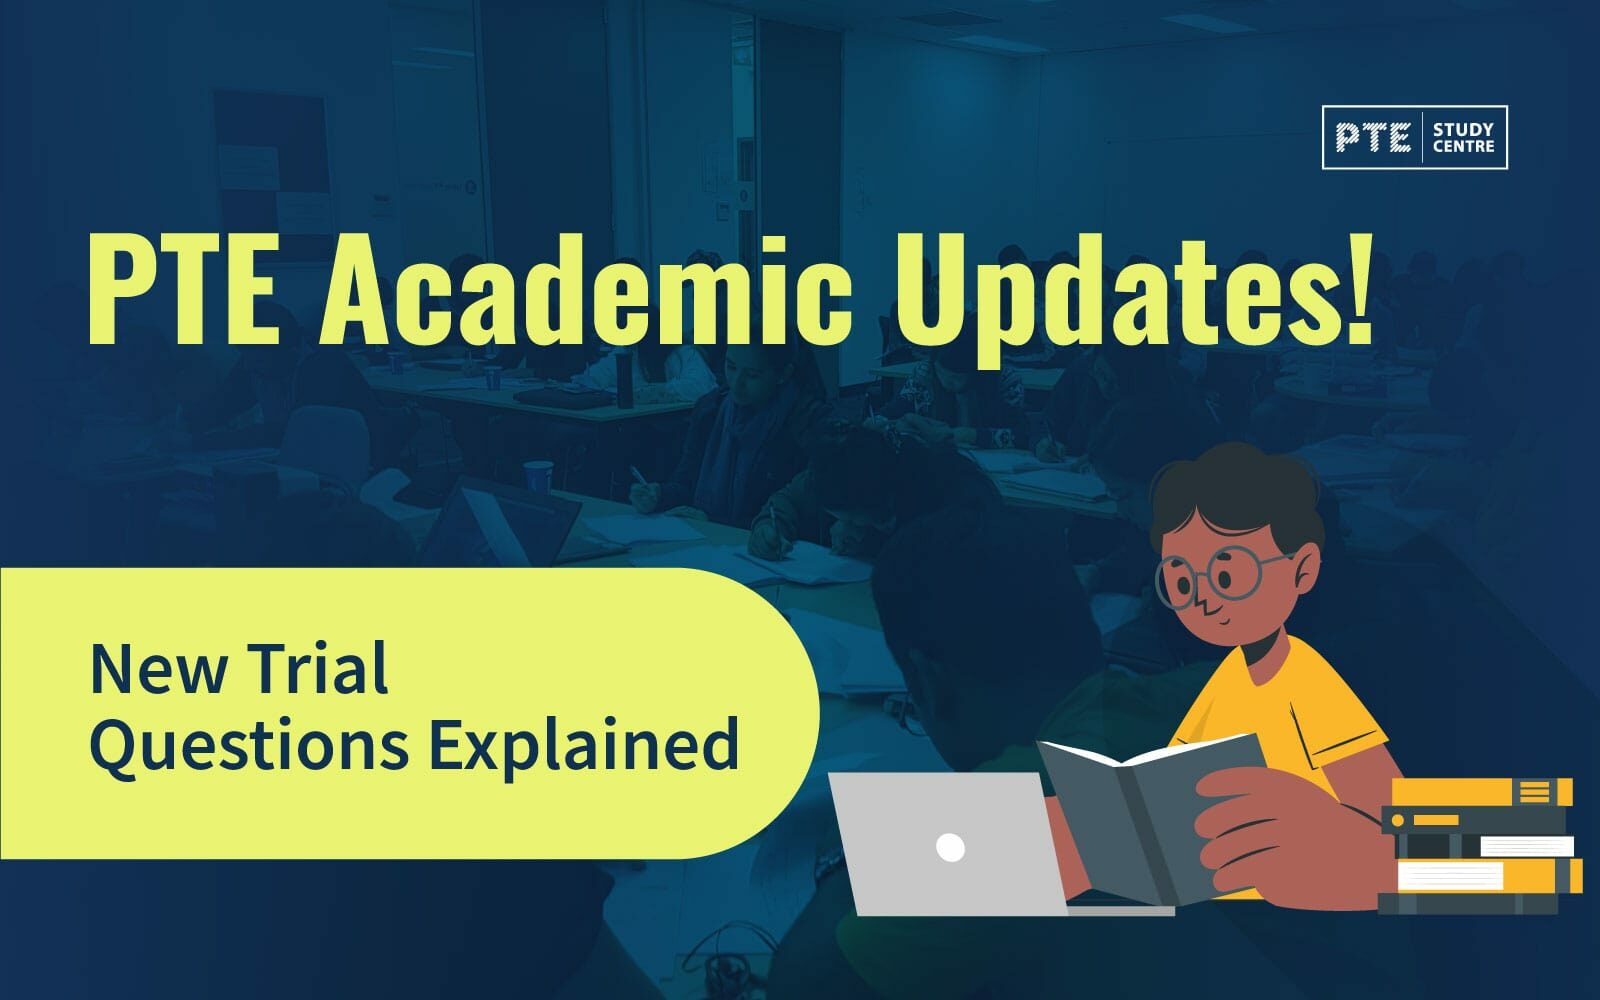 PTE Academic Updates: New Trial Questions Explained